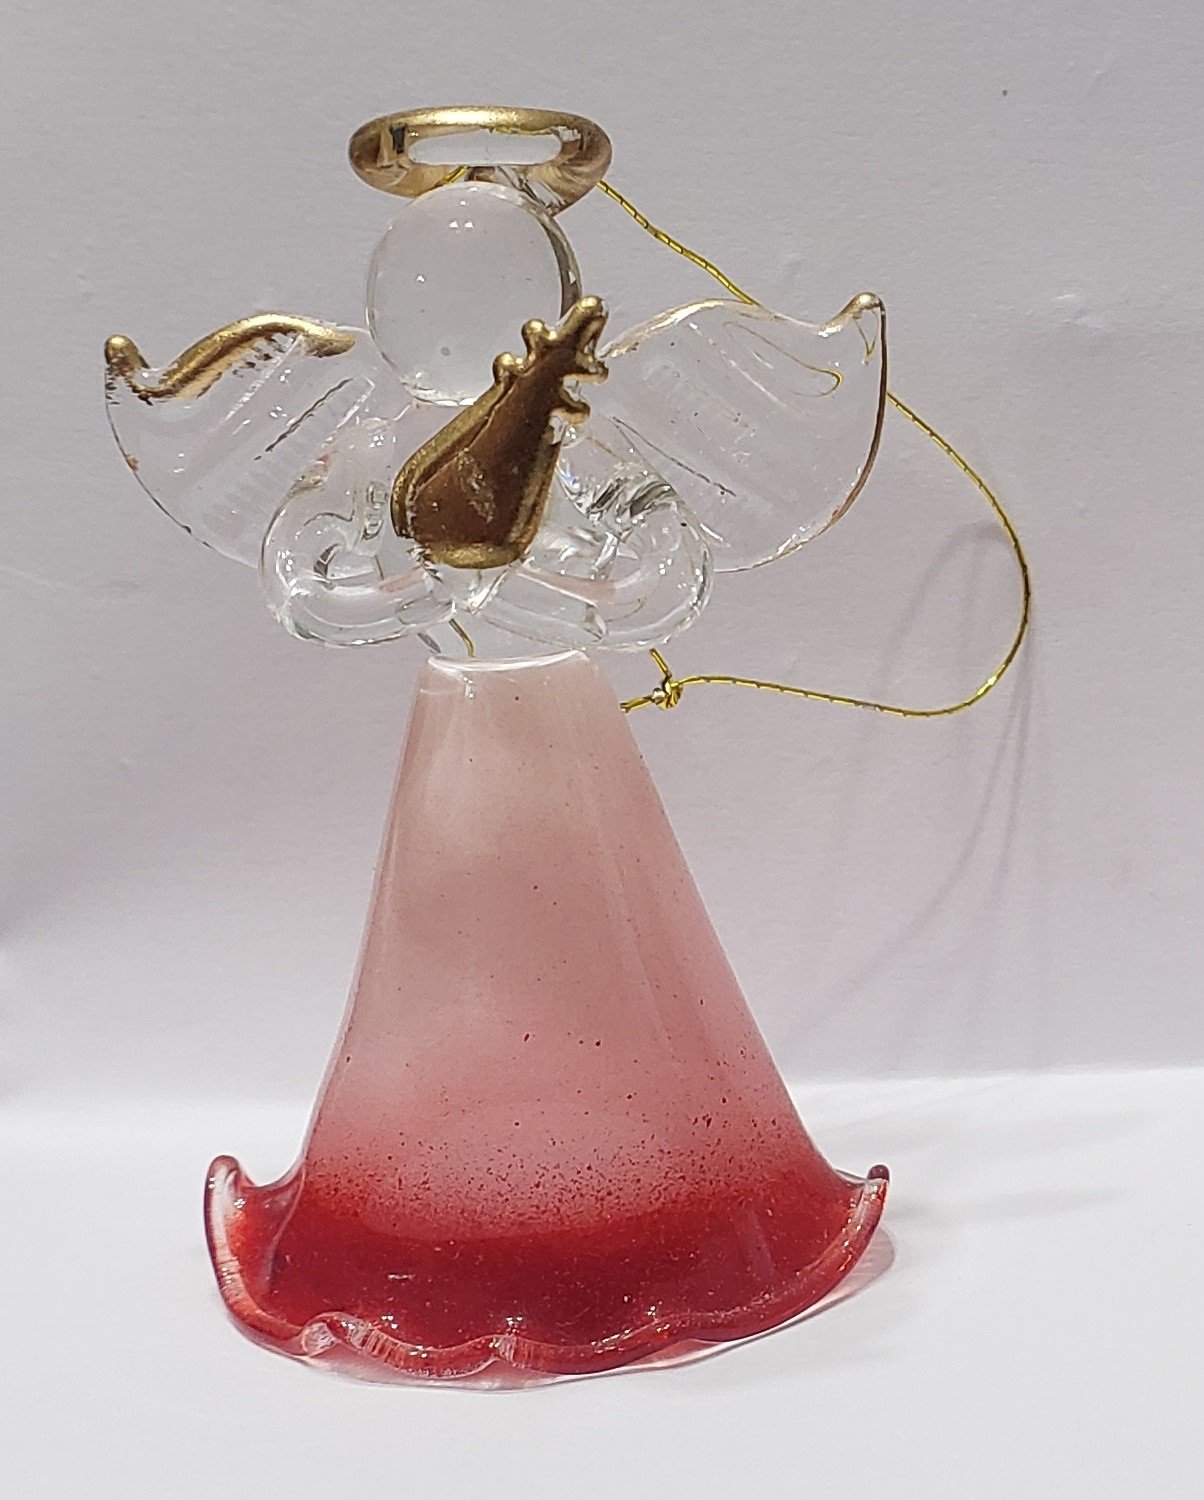 Glass Colored Angel Christmas Ornament with Musical Instrument-Red Smooth Dress